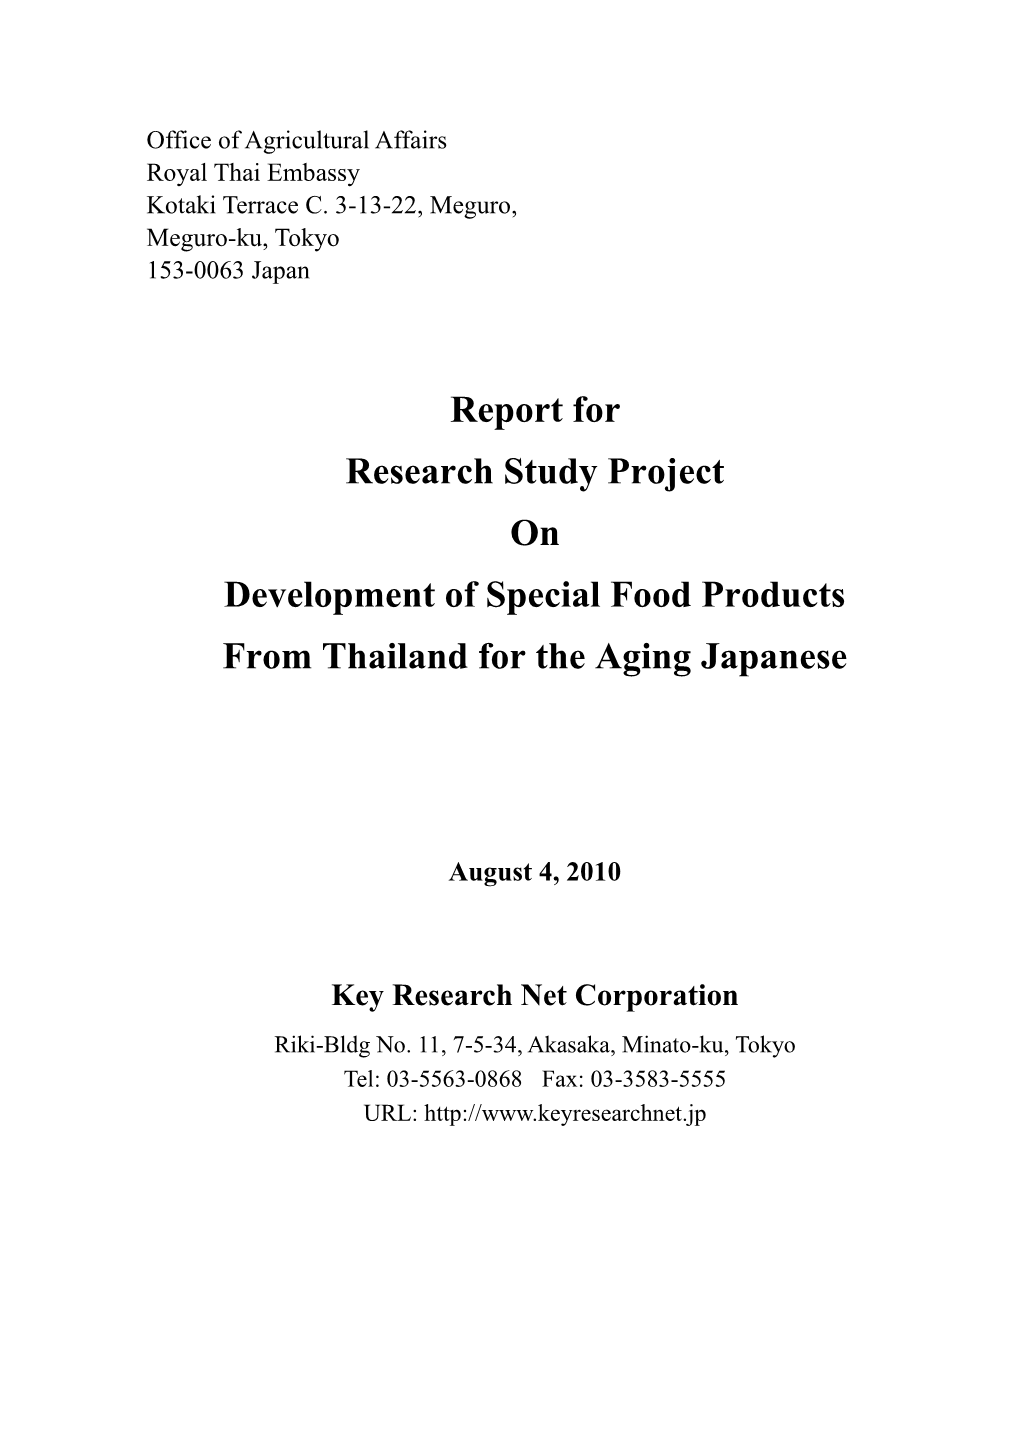 Report for Research Study Project on Development of Special Food Products from Thailand for the Aging Japanese